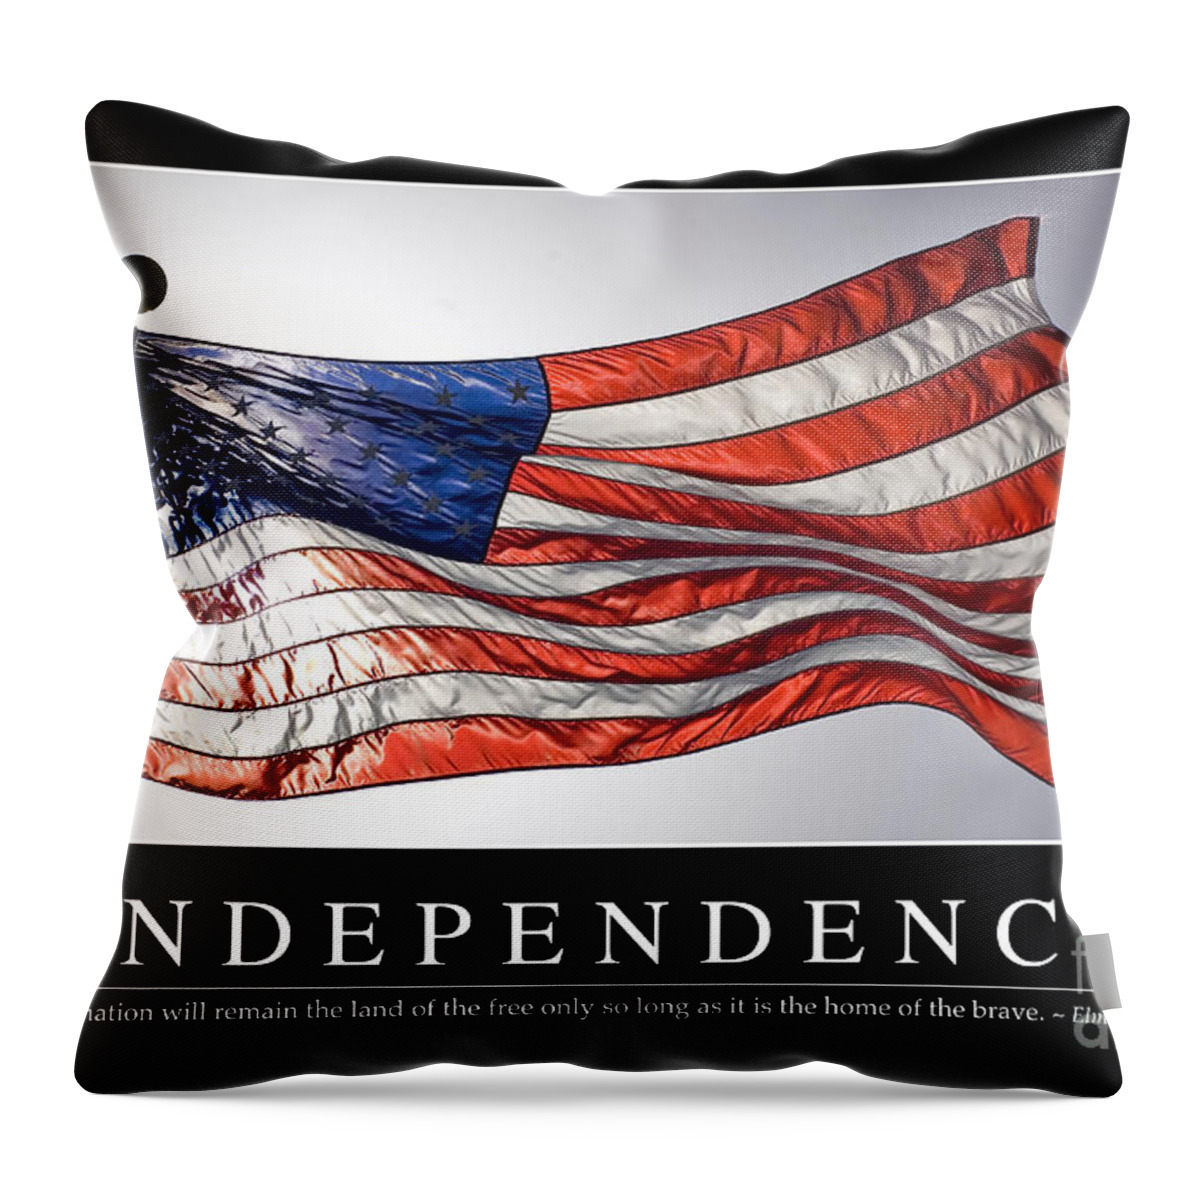 Horizontal Throw Pillow featuring the photograph Independence Inspirational Quote #1 by Stocktrek Images